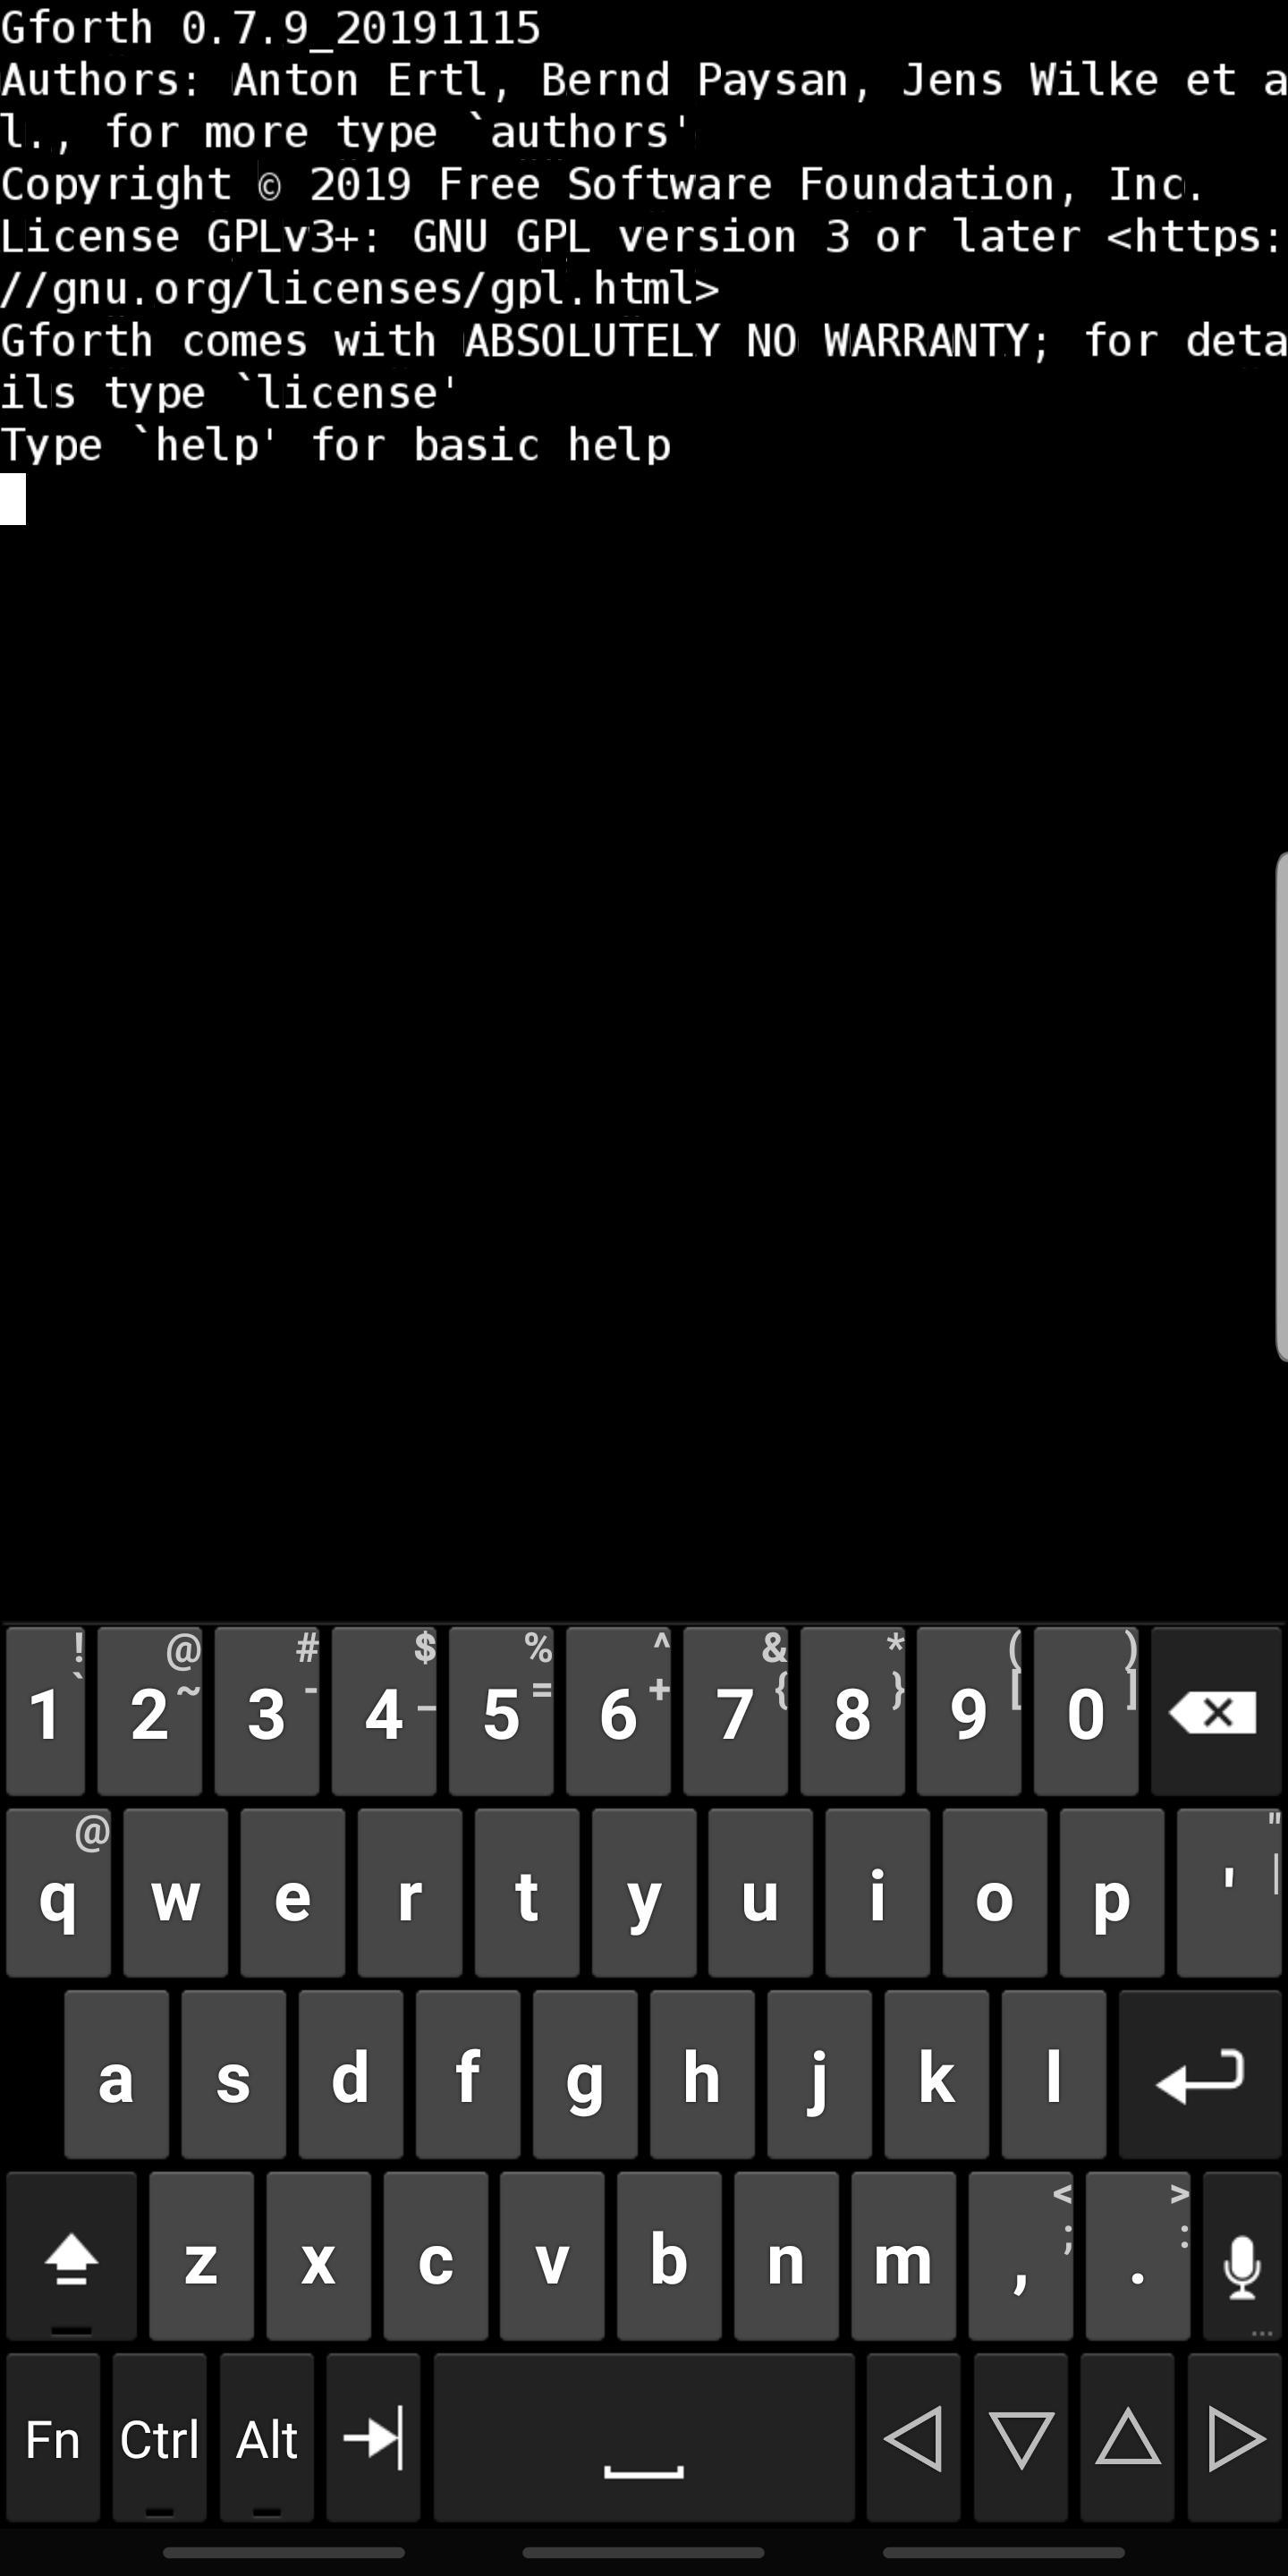 gforth - GNU Forth for Android 0.7.9_20210520 Screenshot 1